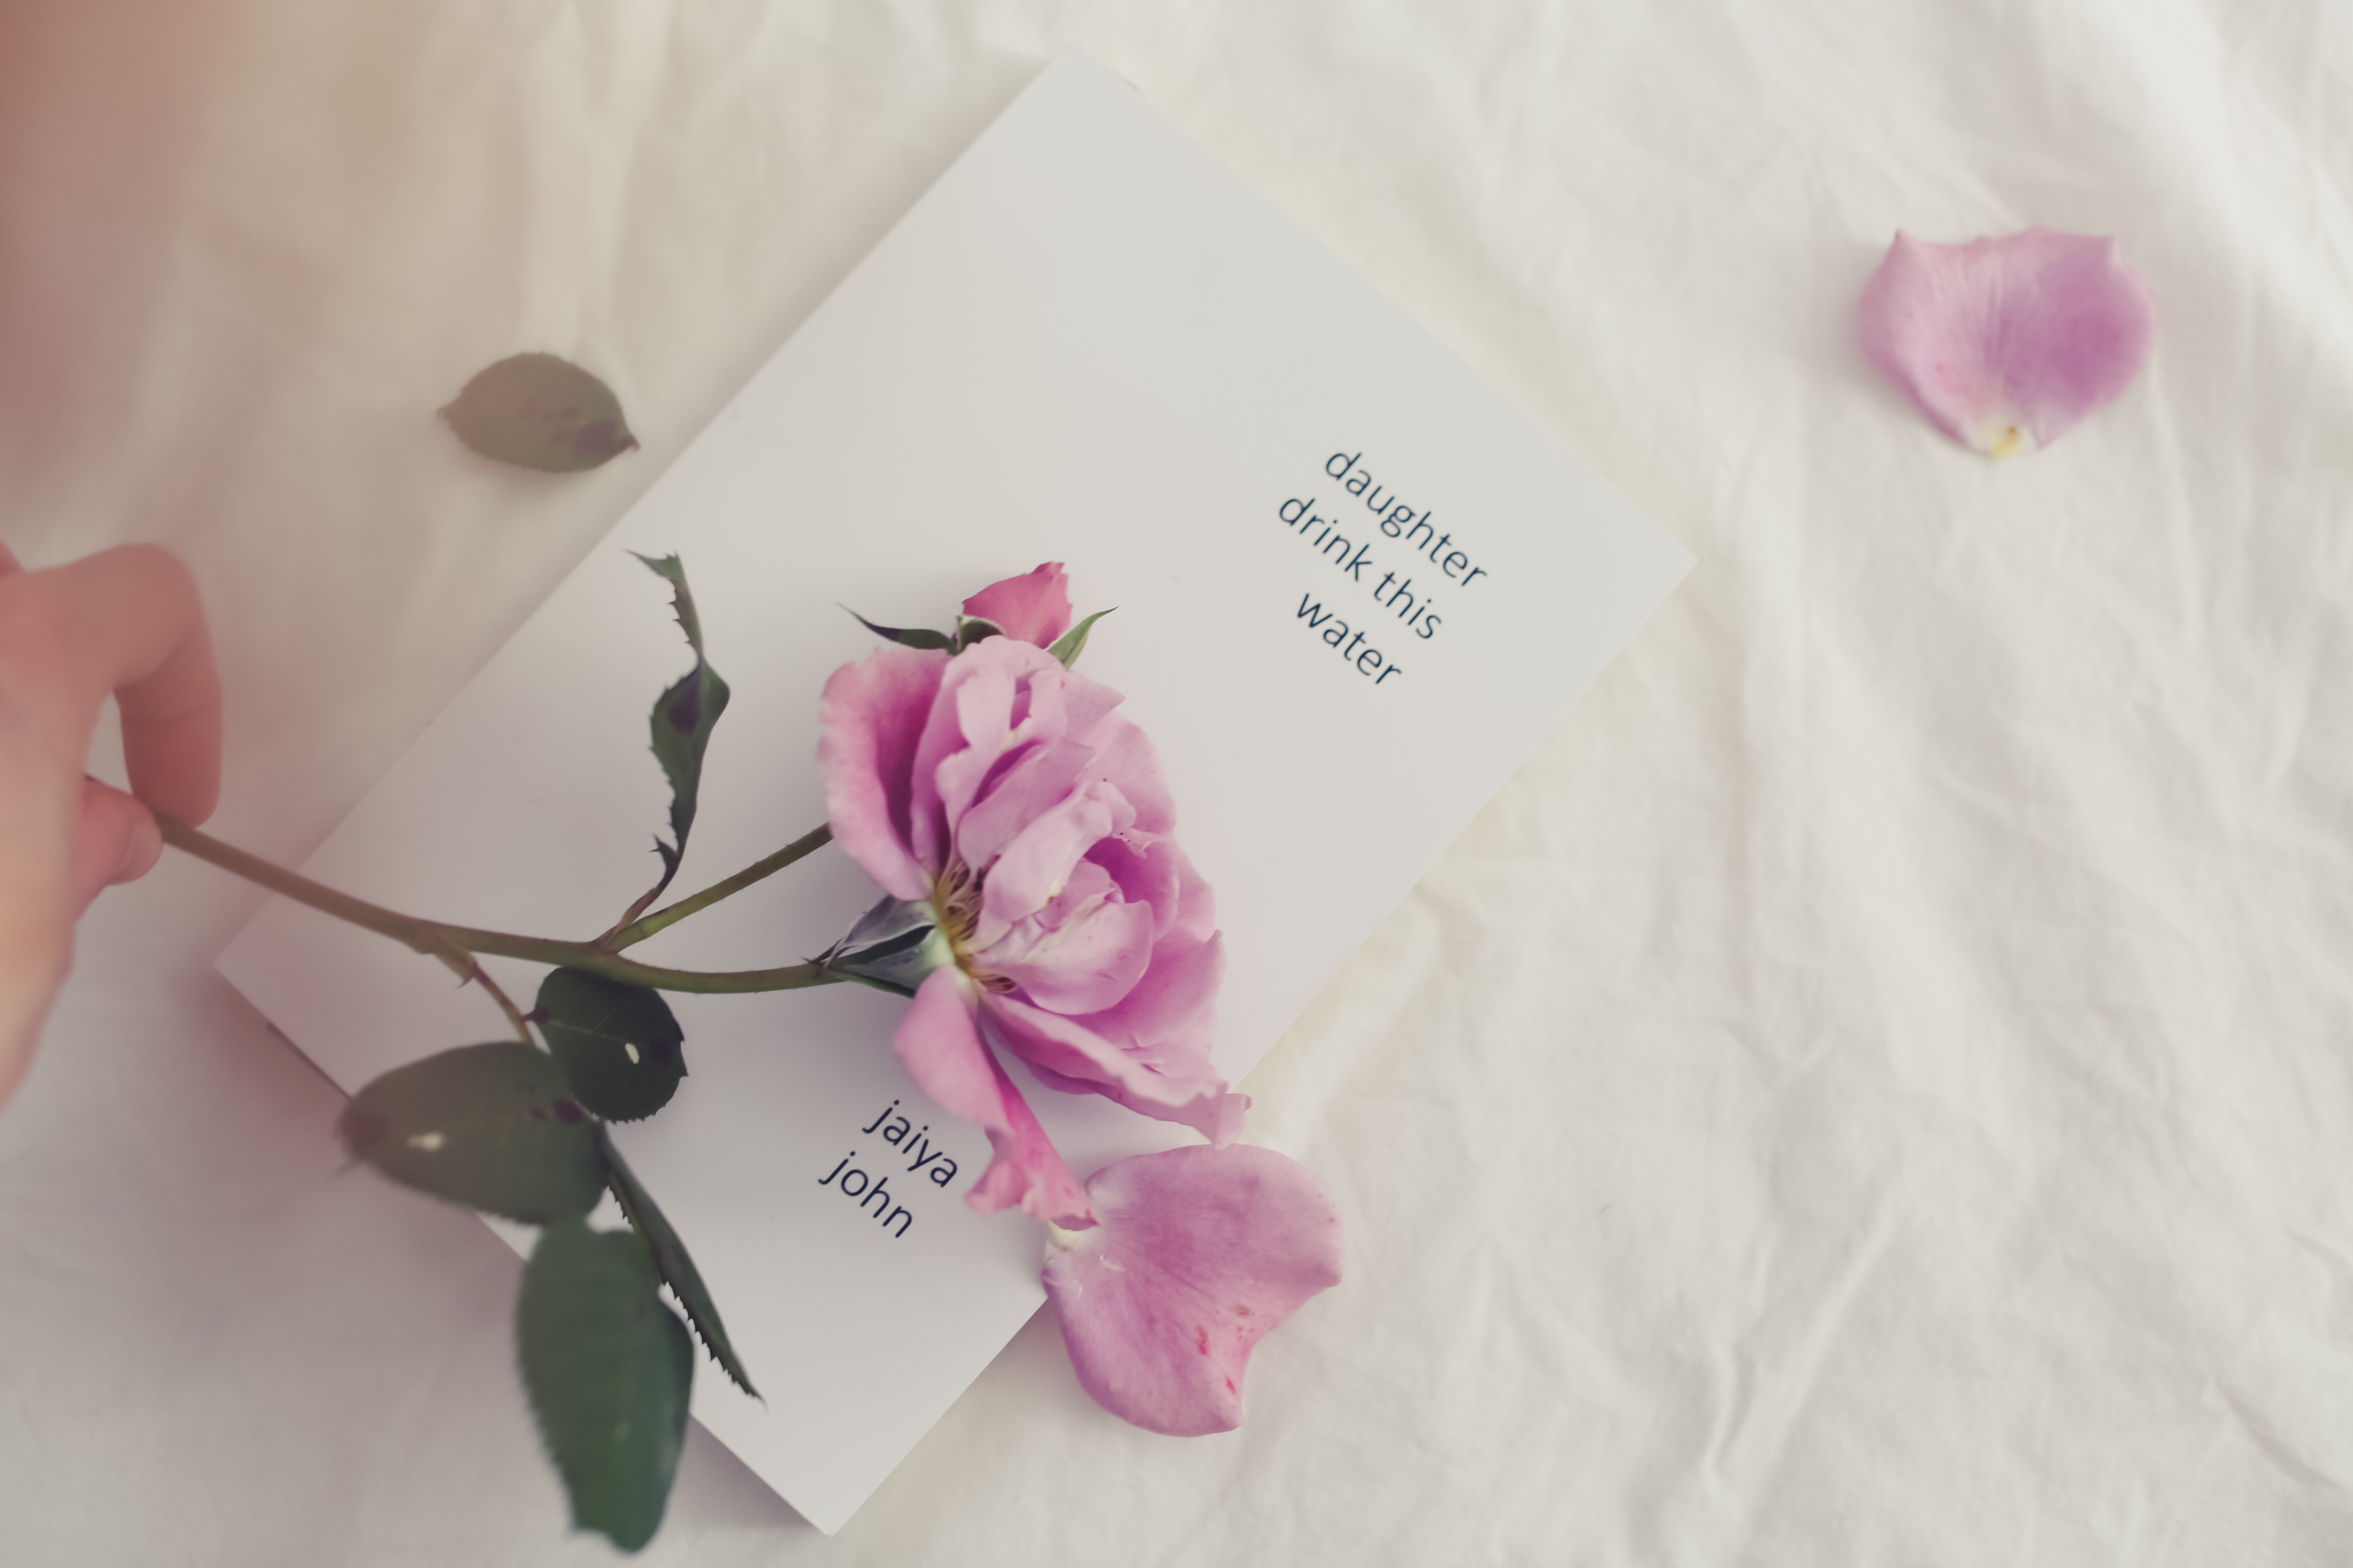 Photo of a book with a pink flower and a hand